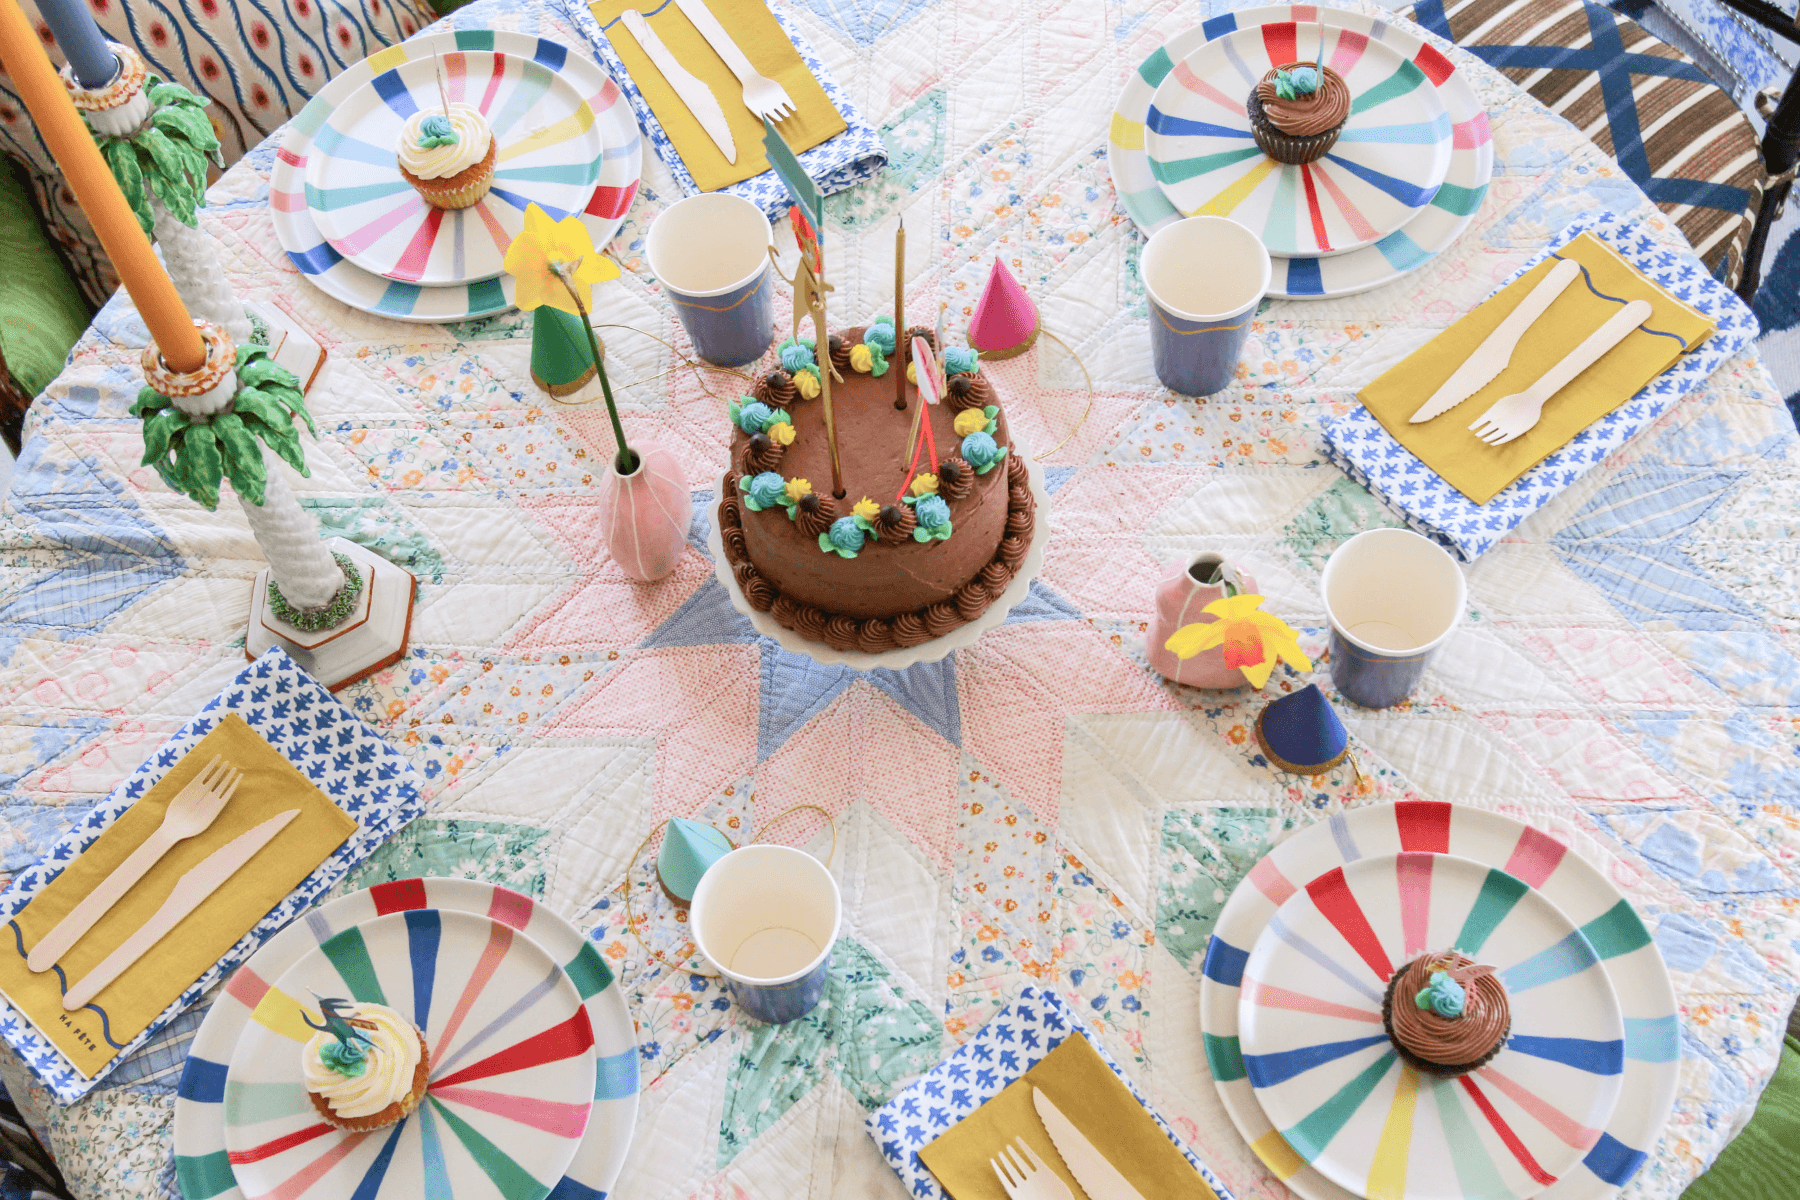 Kids' birthday party table set with a quilted tablecloth, rainbow plates, tiny party hats, and colorful cups and napkins. 